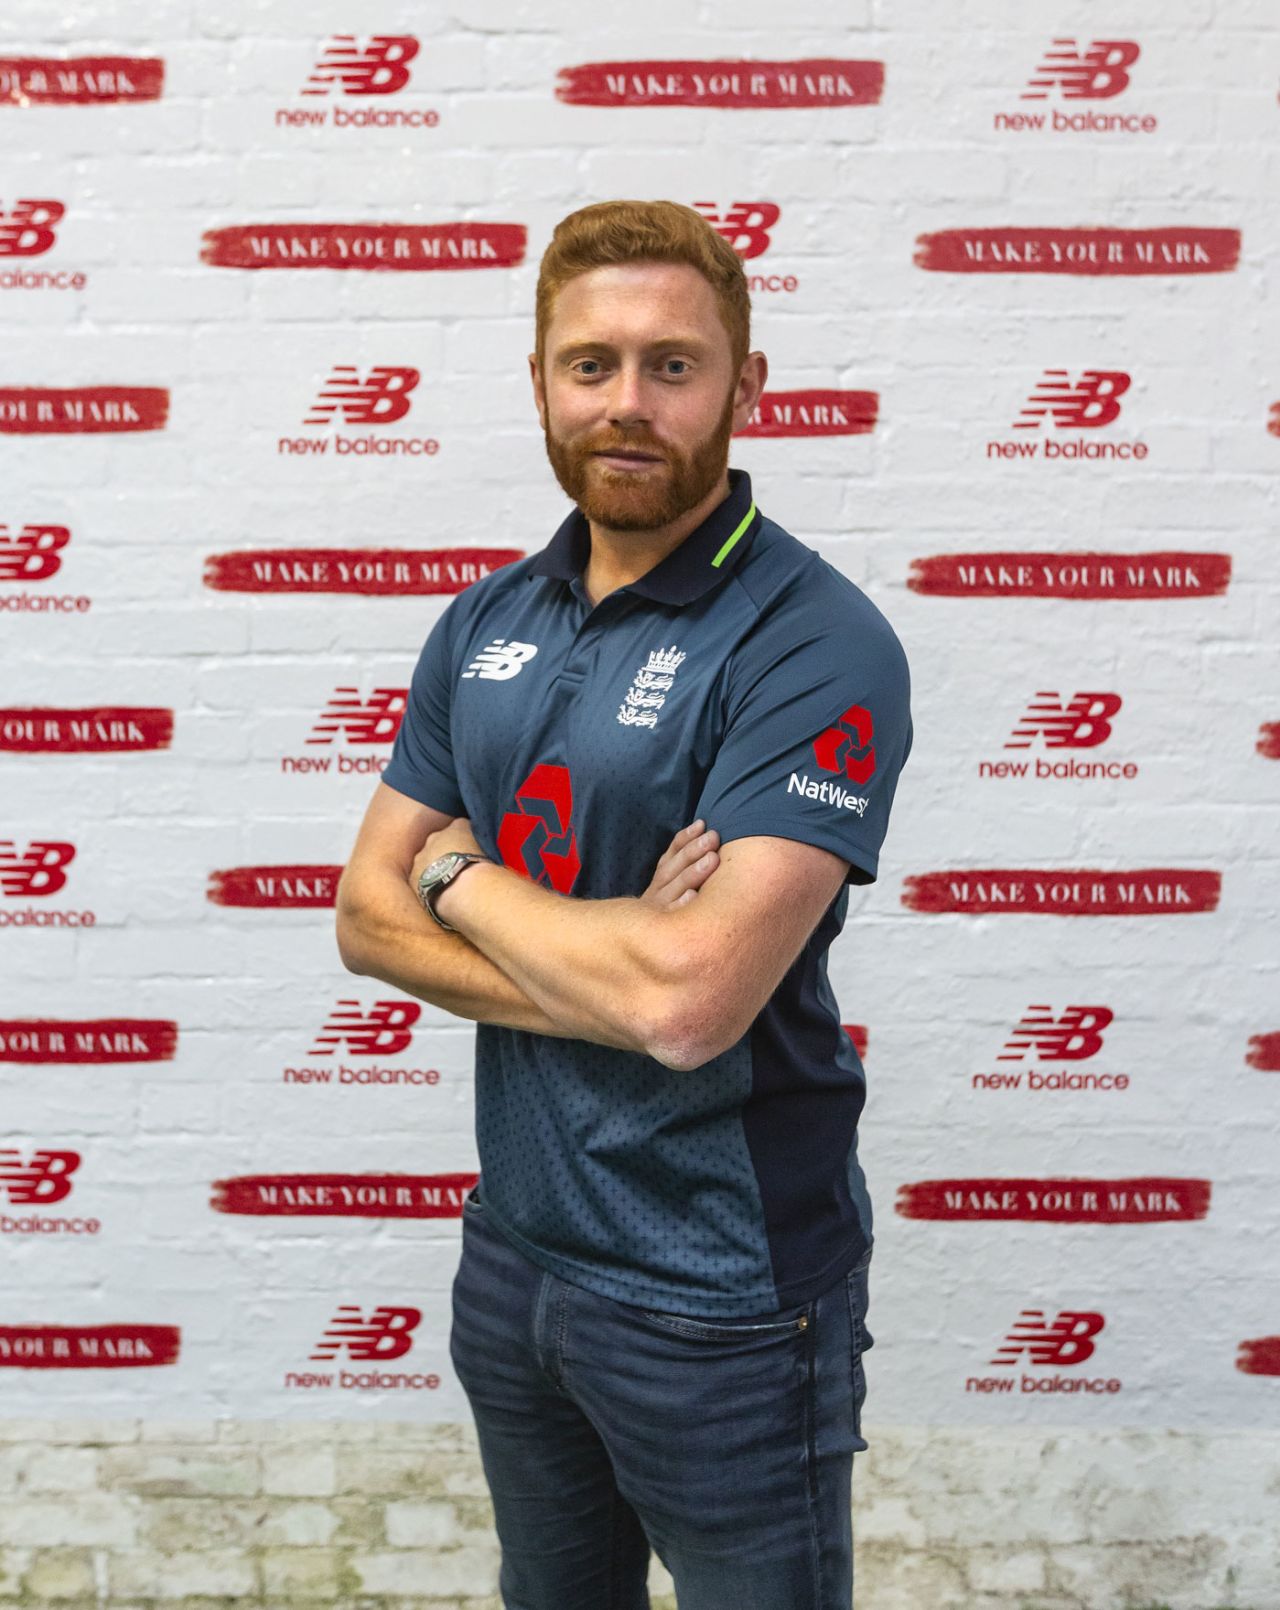 Jonny Bairstow at the launch of England's new one-day kit, London, May 17, 2018